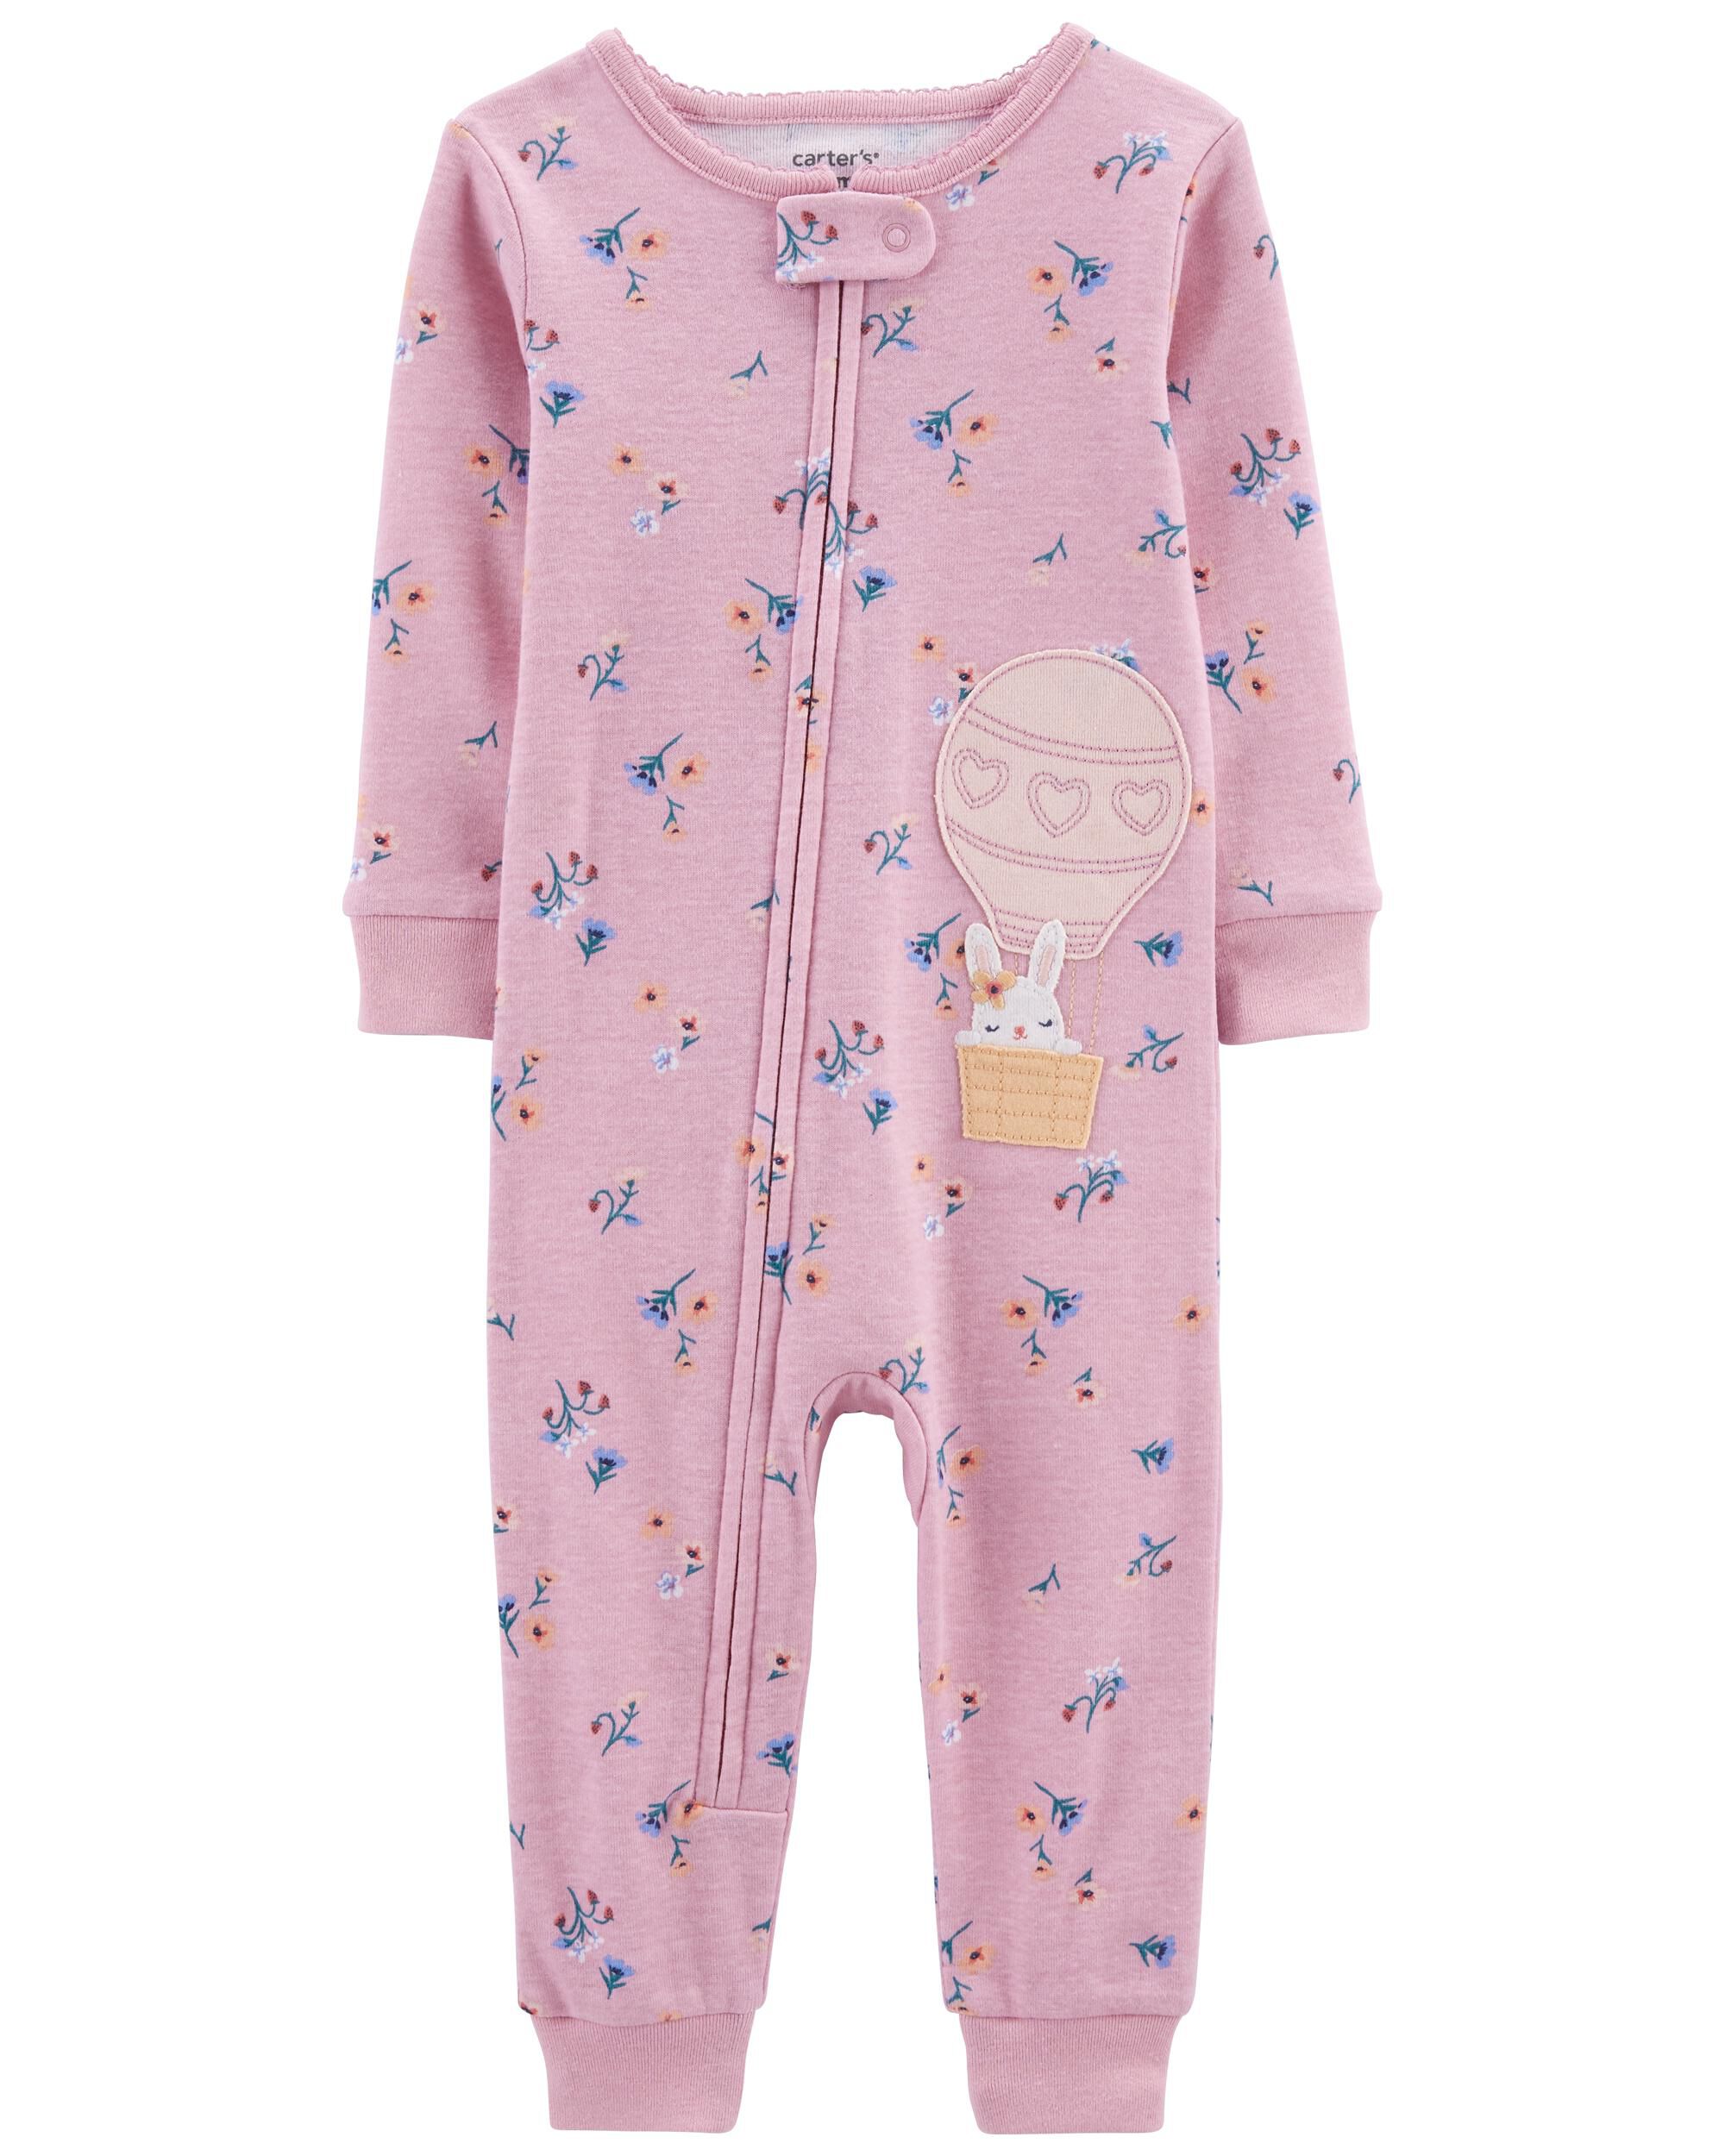 New Carters Girls One Piece Footed Pajamas Set of 2 Flowers-Polka Dot 6 Month 